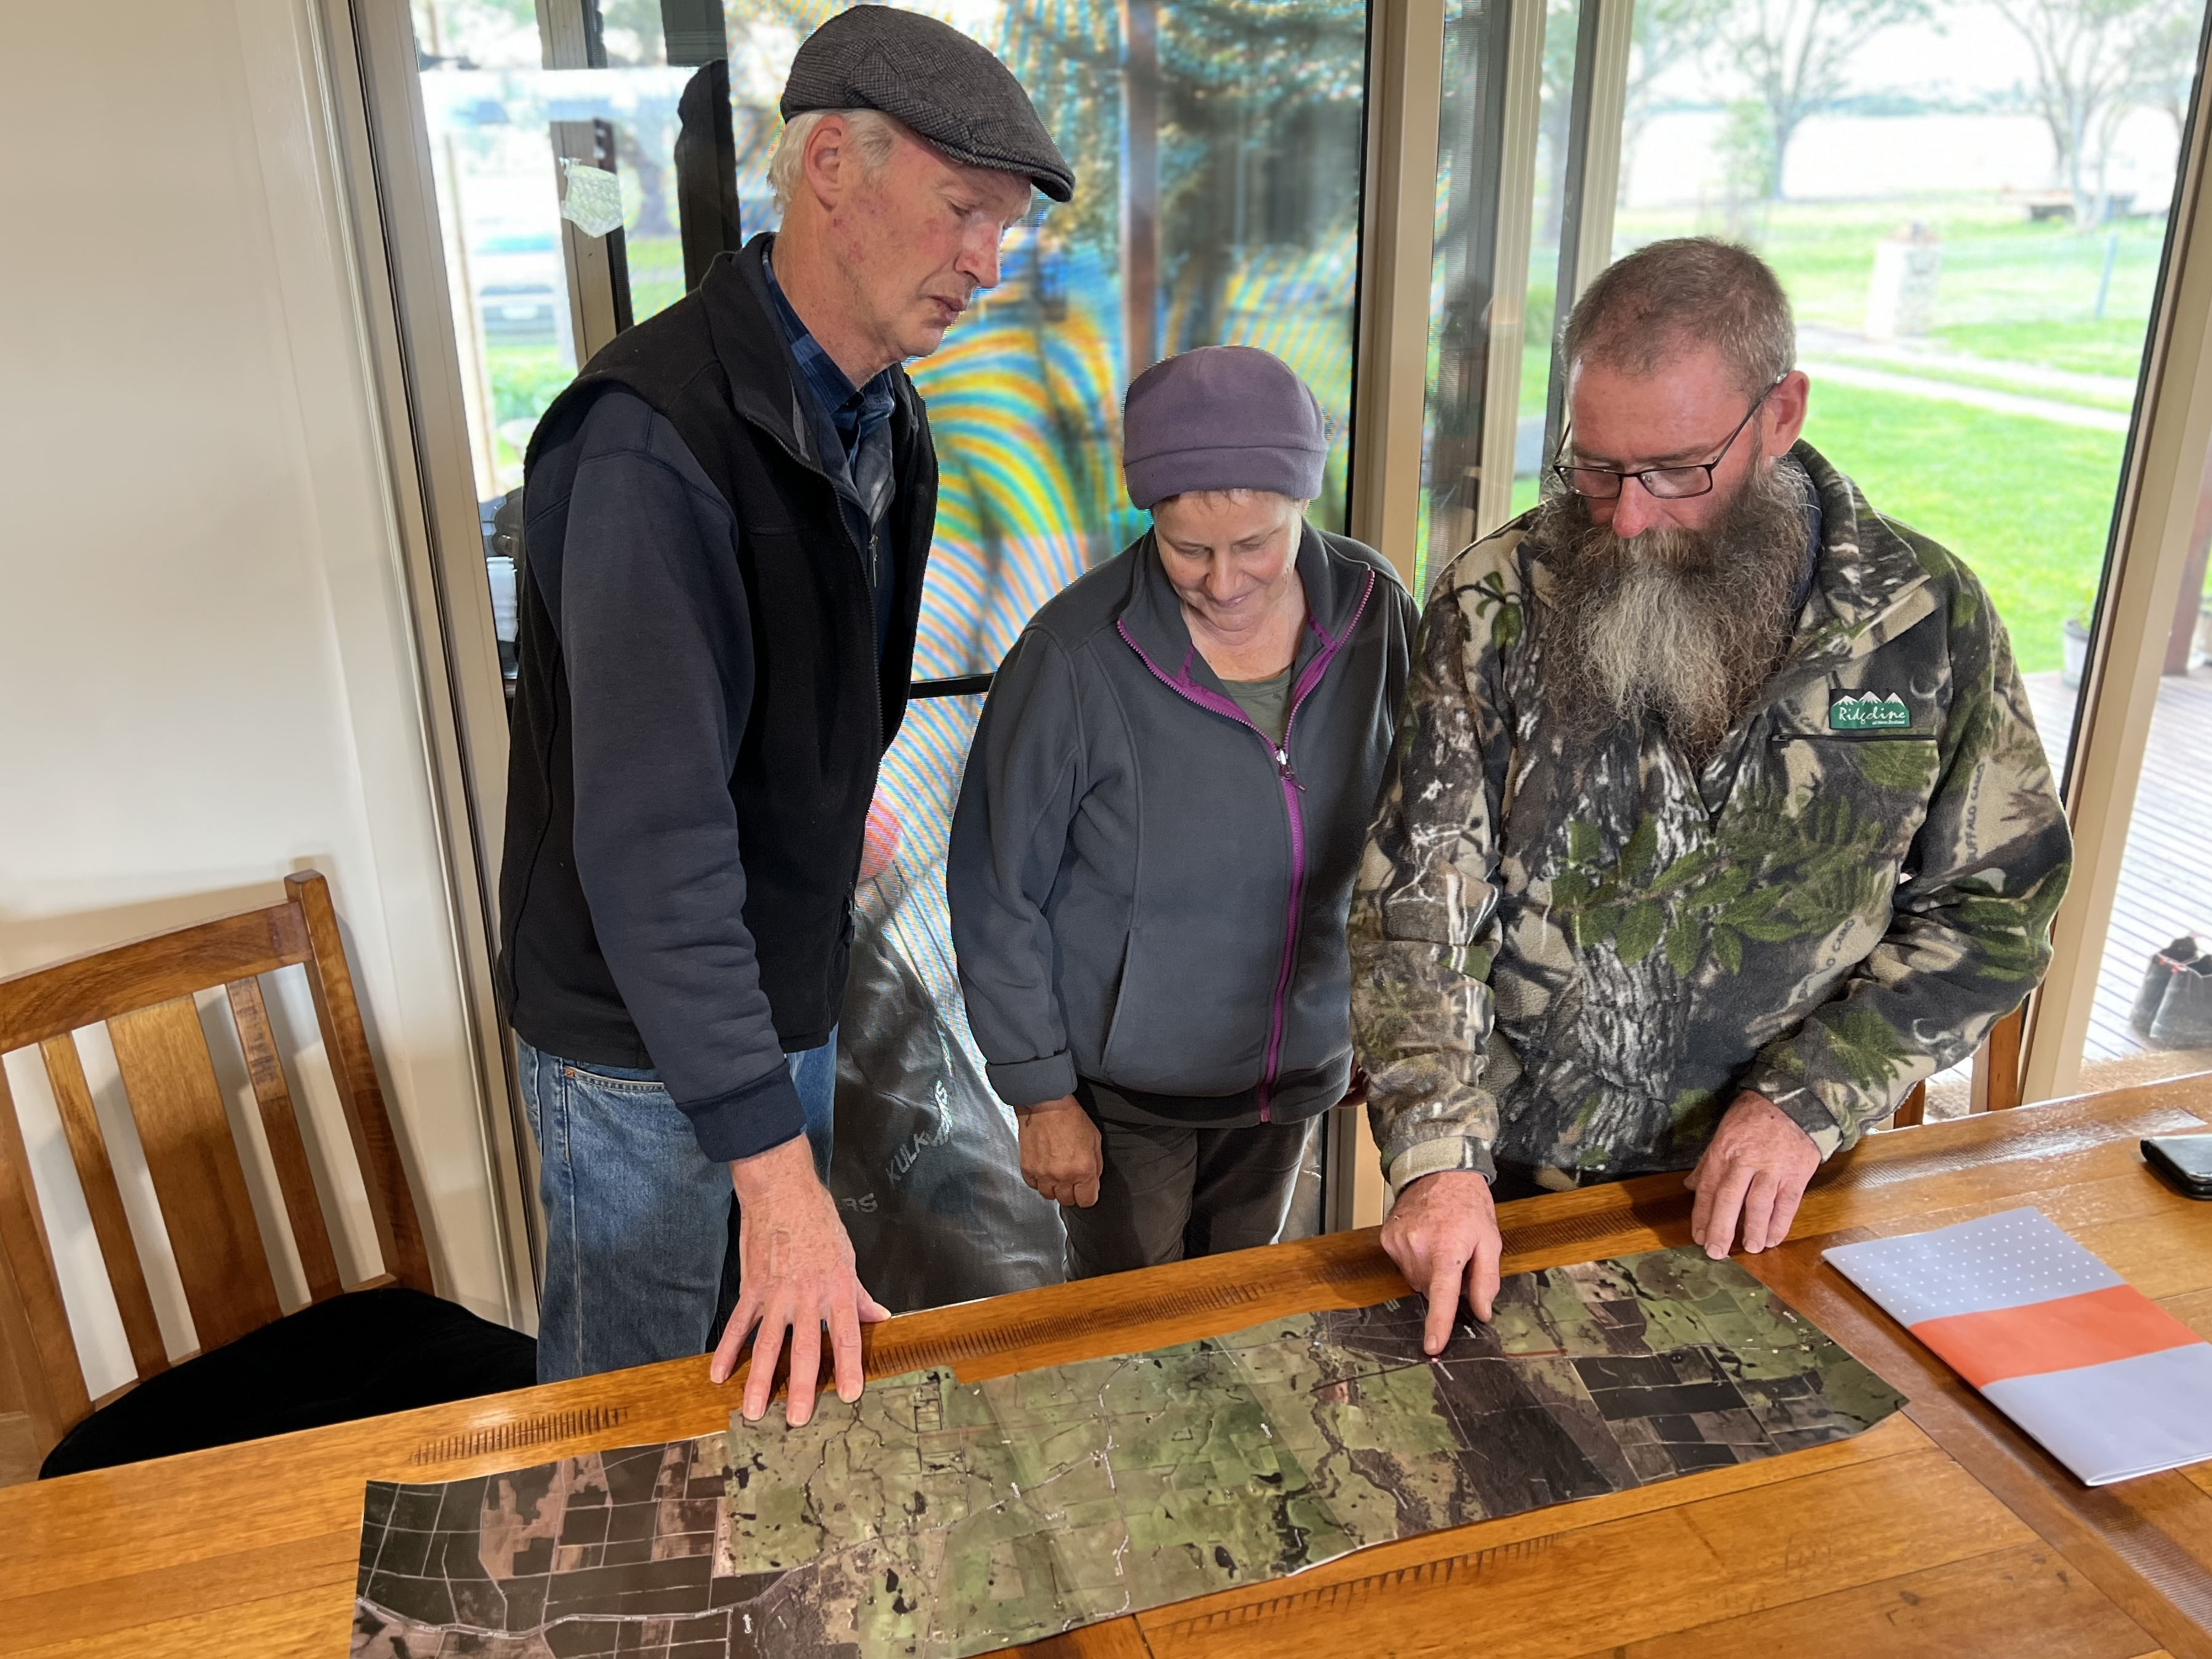 Three farmers stand looking at a map on a kitchen table